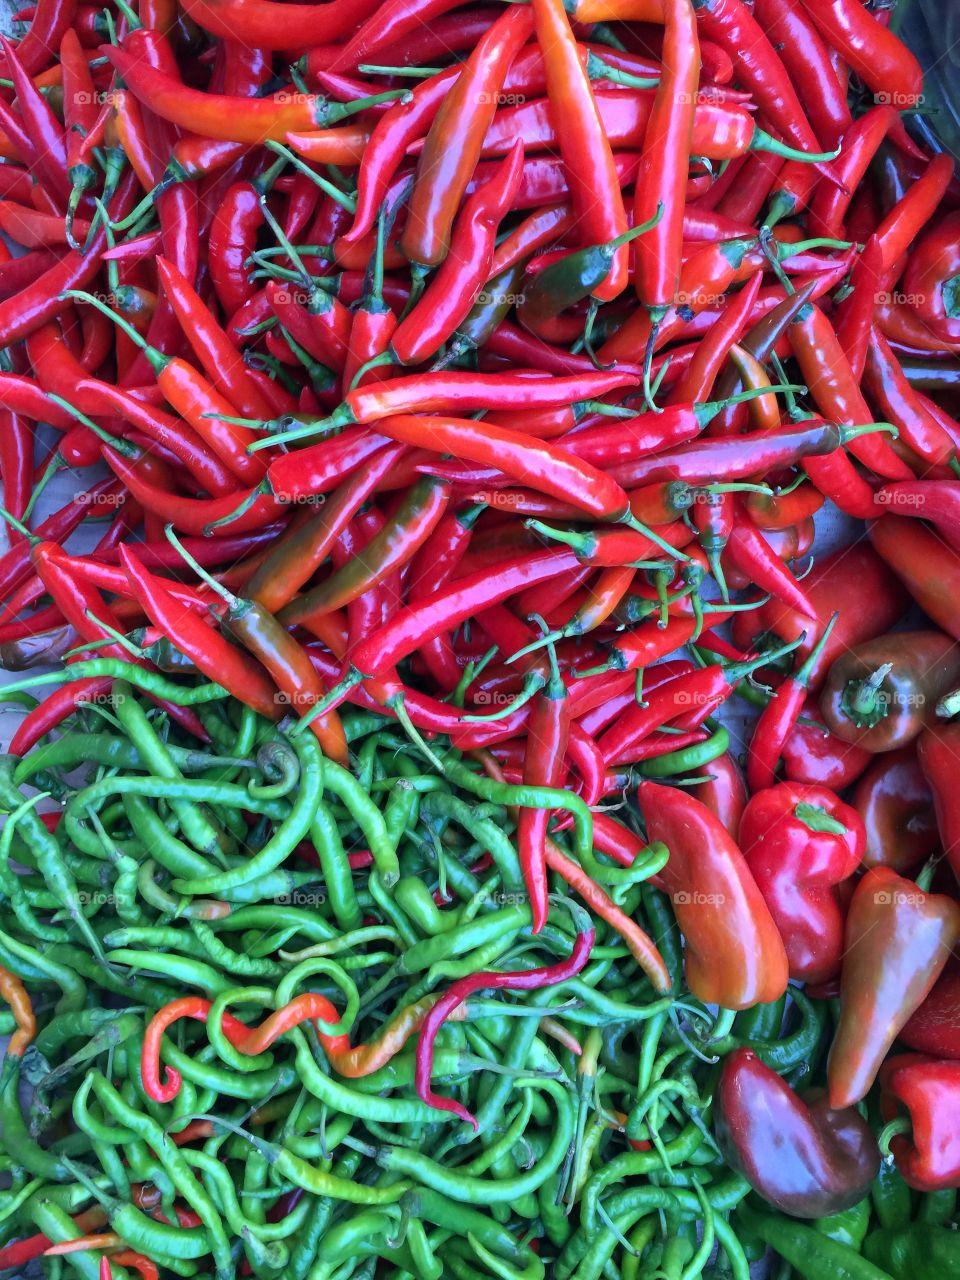 Red and green peppers in the market